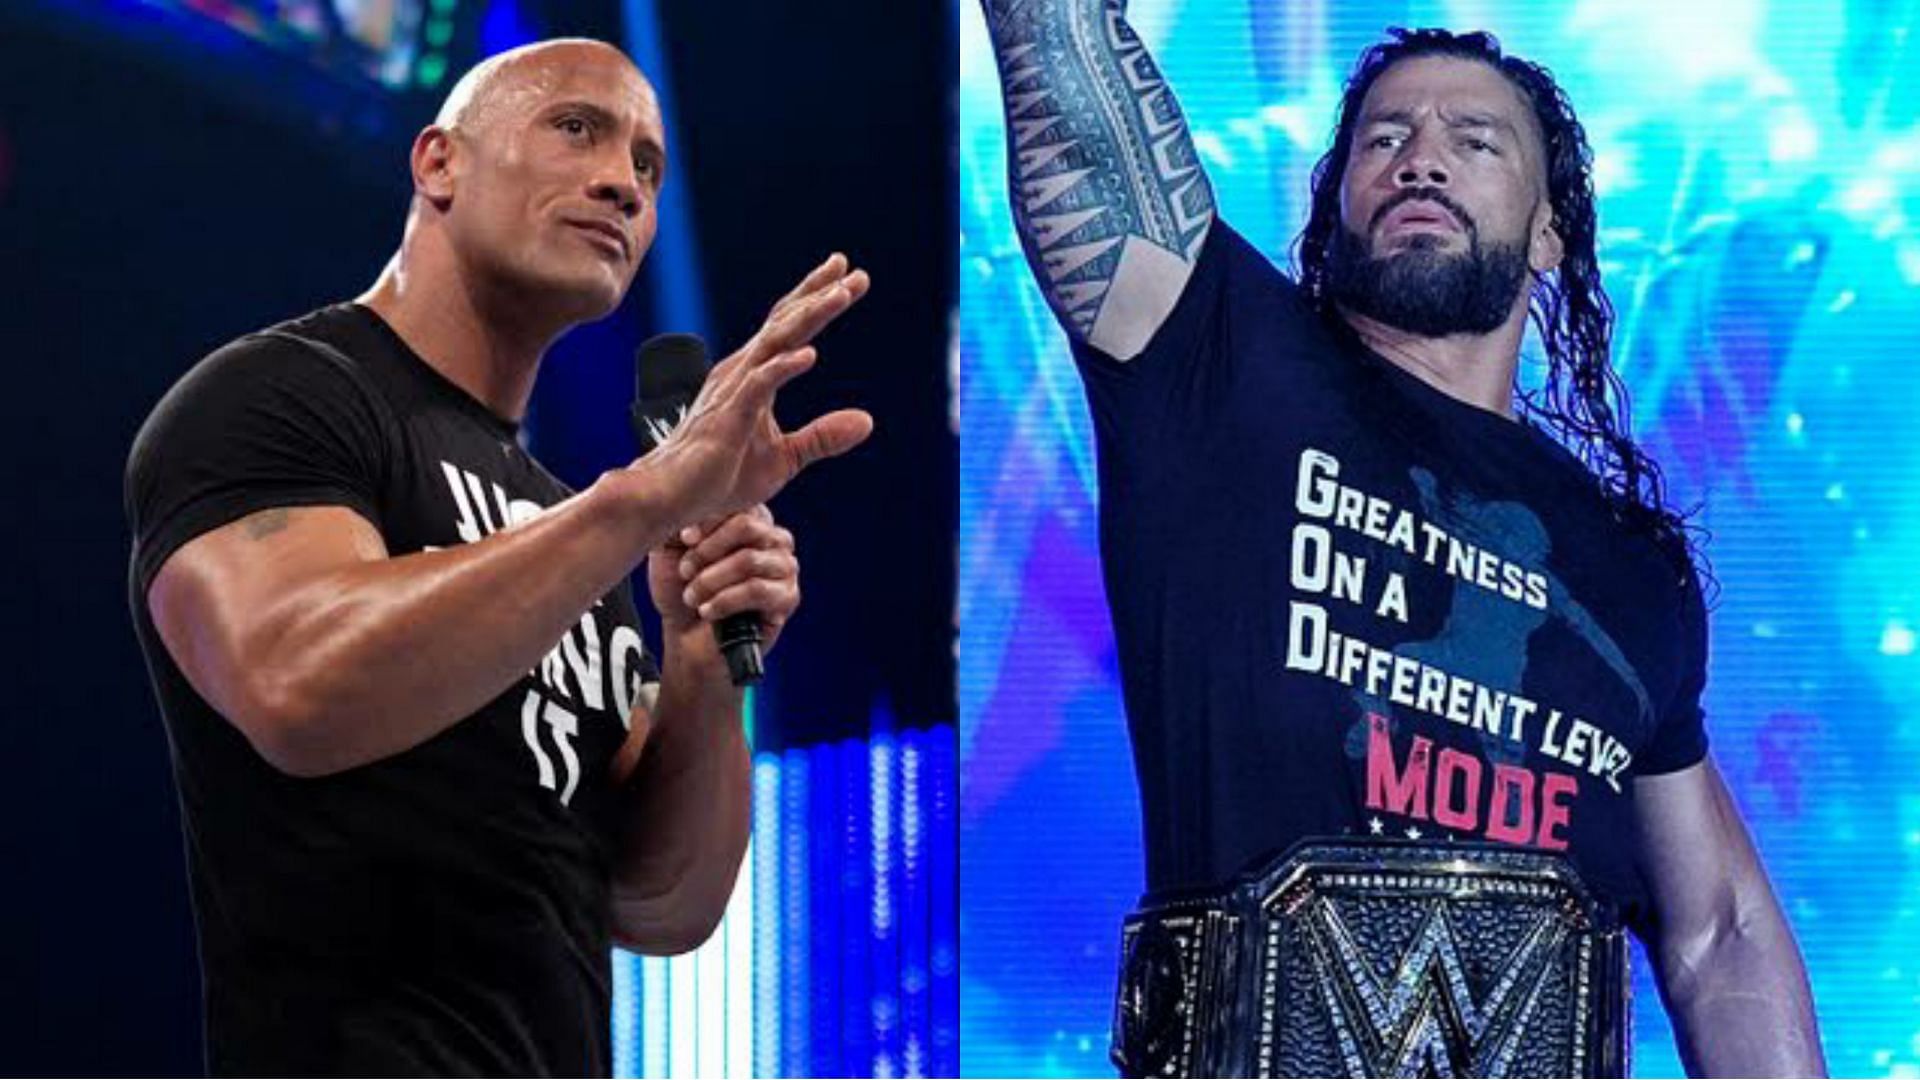 The Rock and Roman Reigns are cousins.